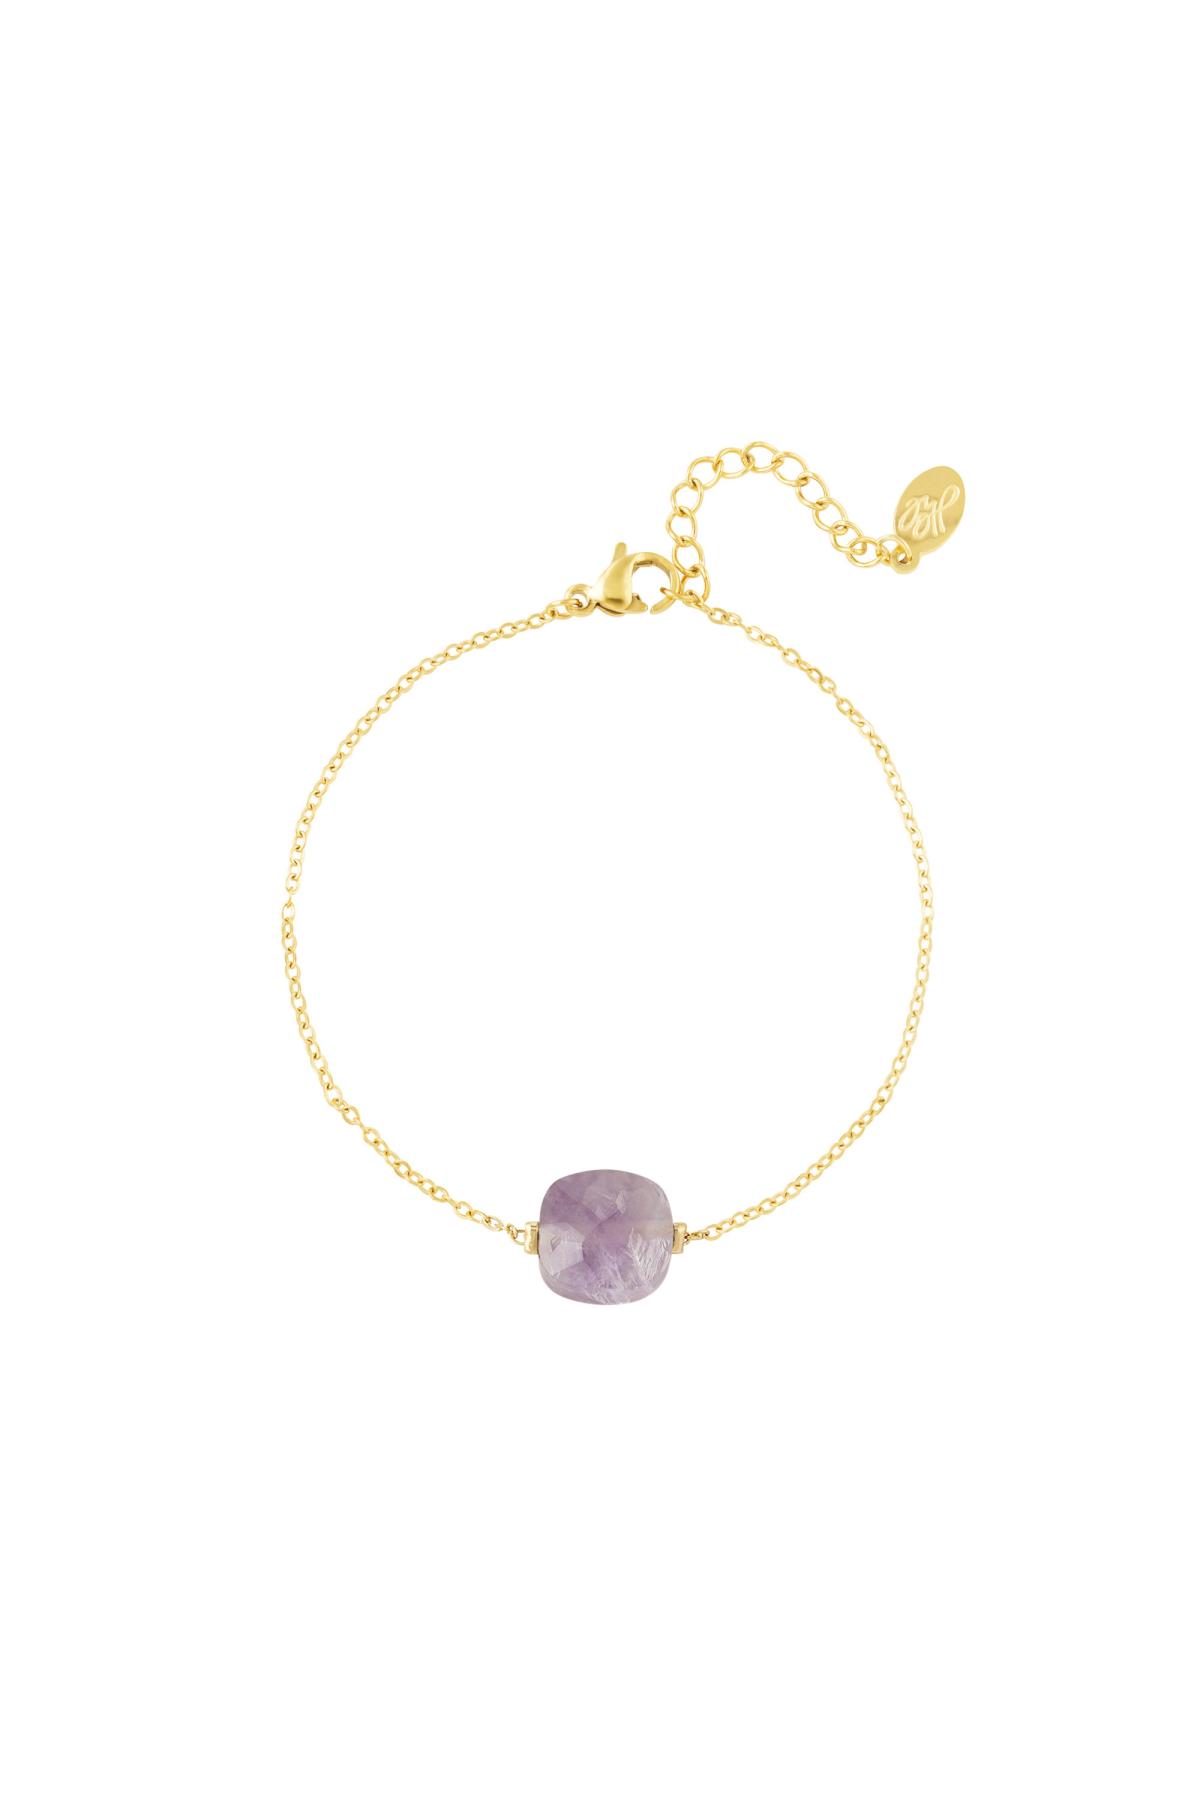 Bracelet with stone - Natural stones collection Purple Stainless Steel 